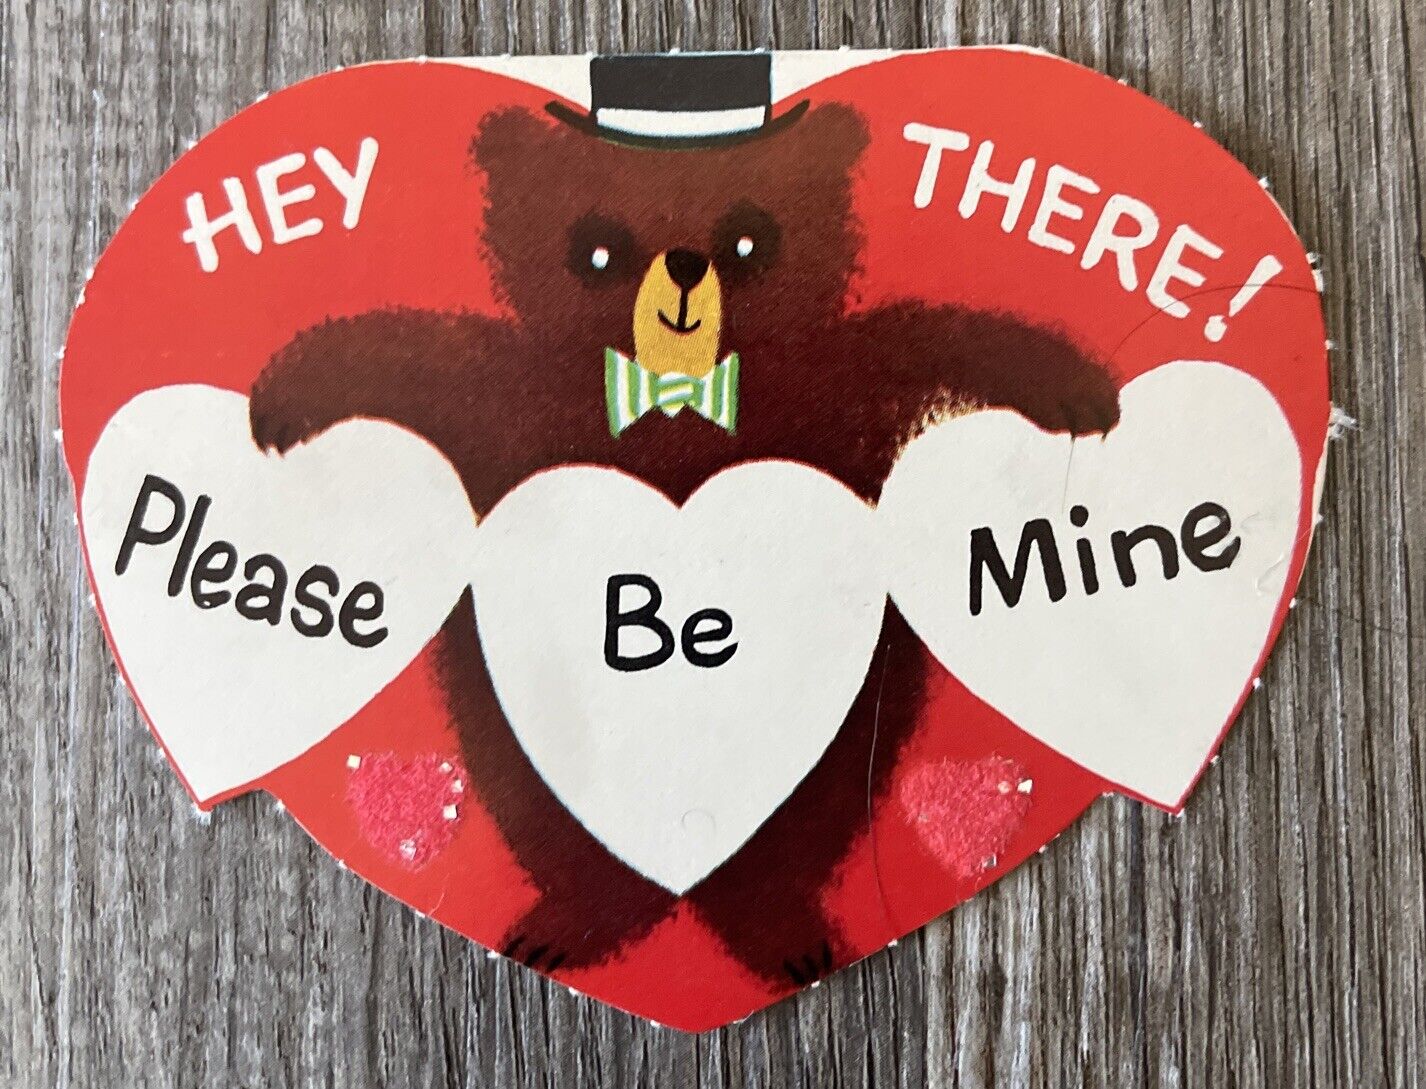 “Hey There Please Be Mine” Vintage Valentines Day Card 